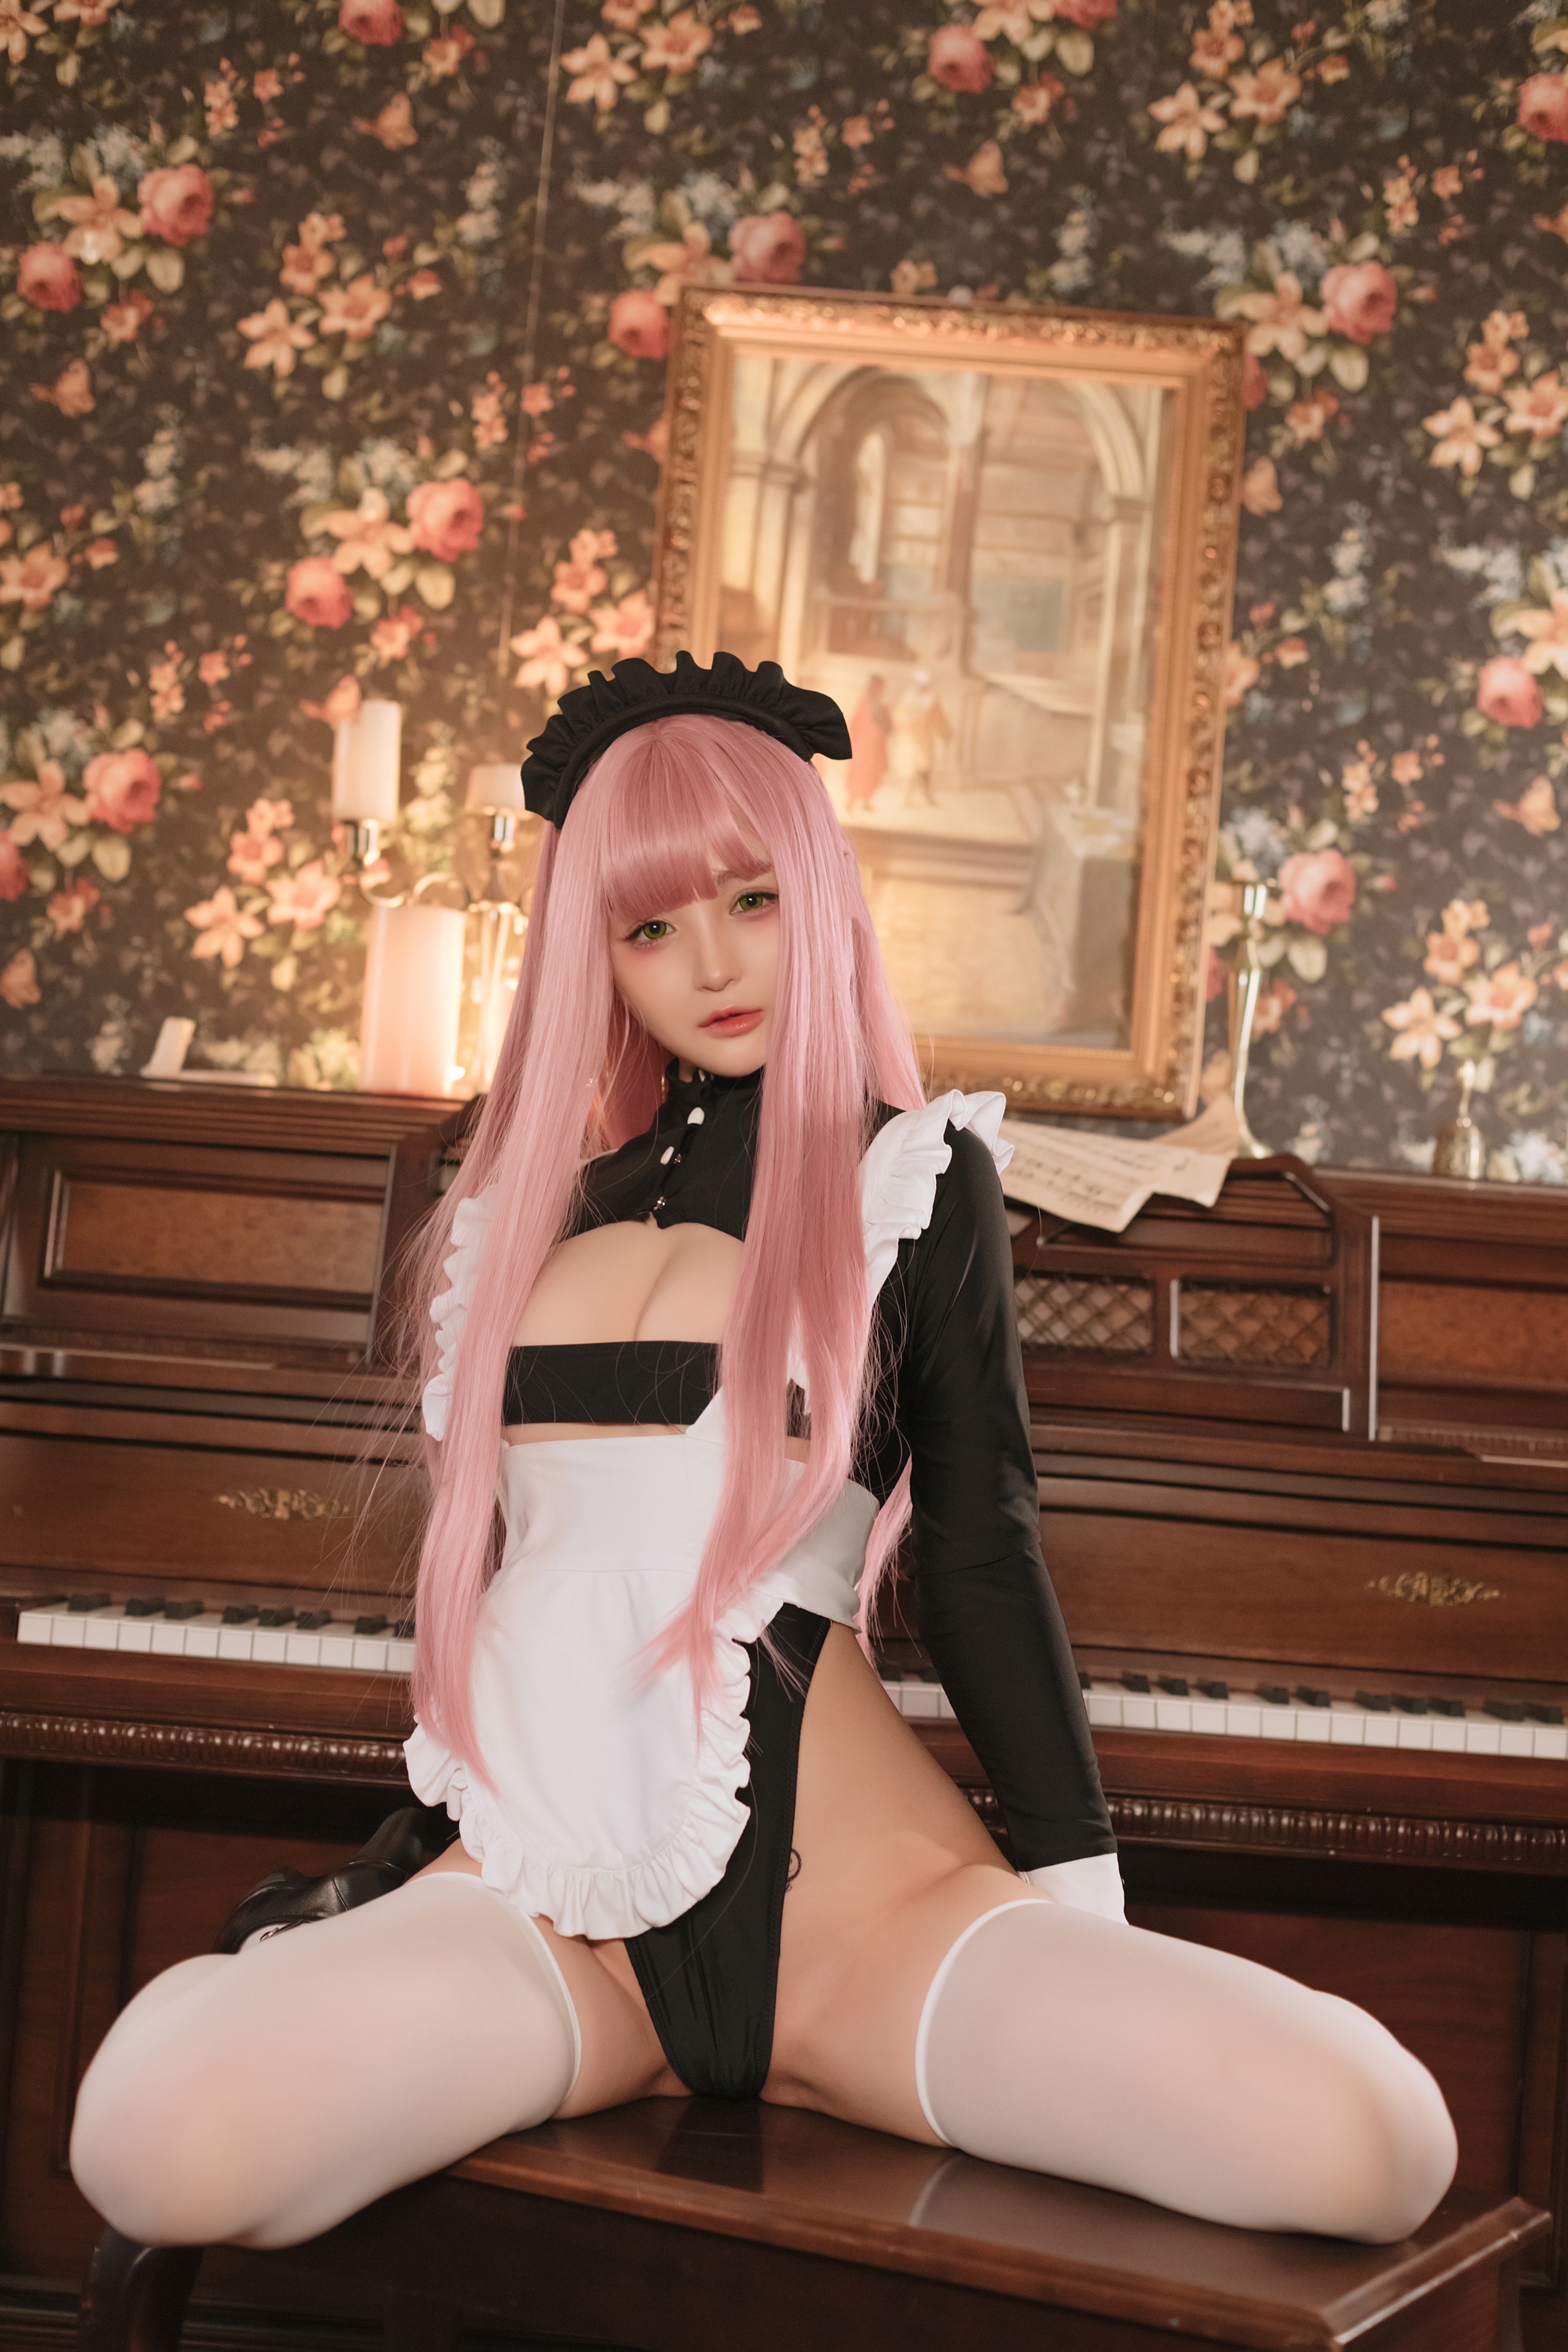 People 2688x4032 Sakurai Niki Asian women model cosplay maid maid outfit pink hair piano indoors women indoors looking at viewer cleavage sitting lingerie stockings white stockings picture frames spread legs